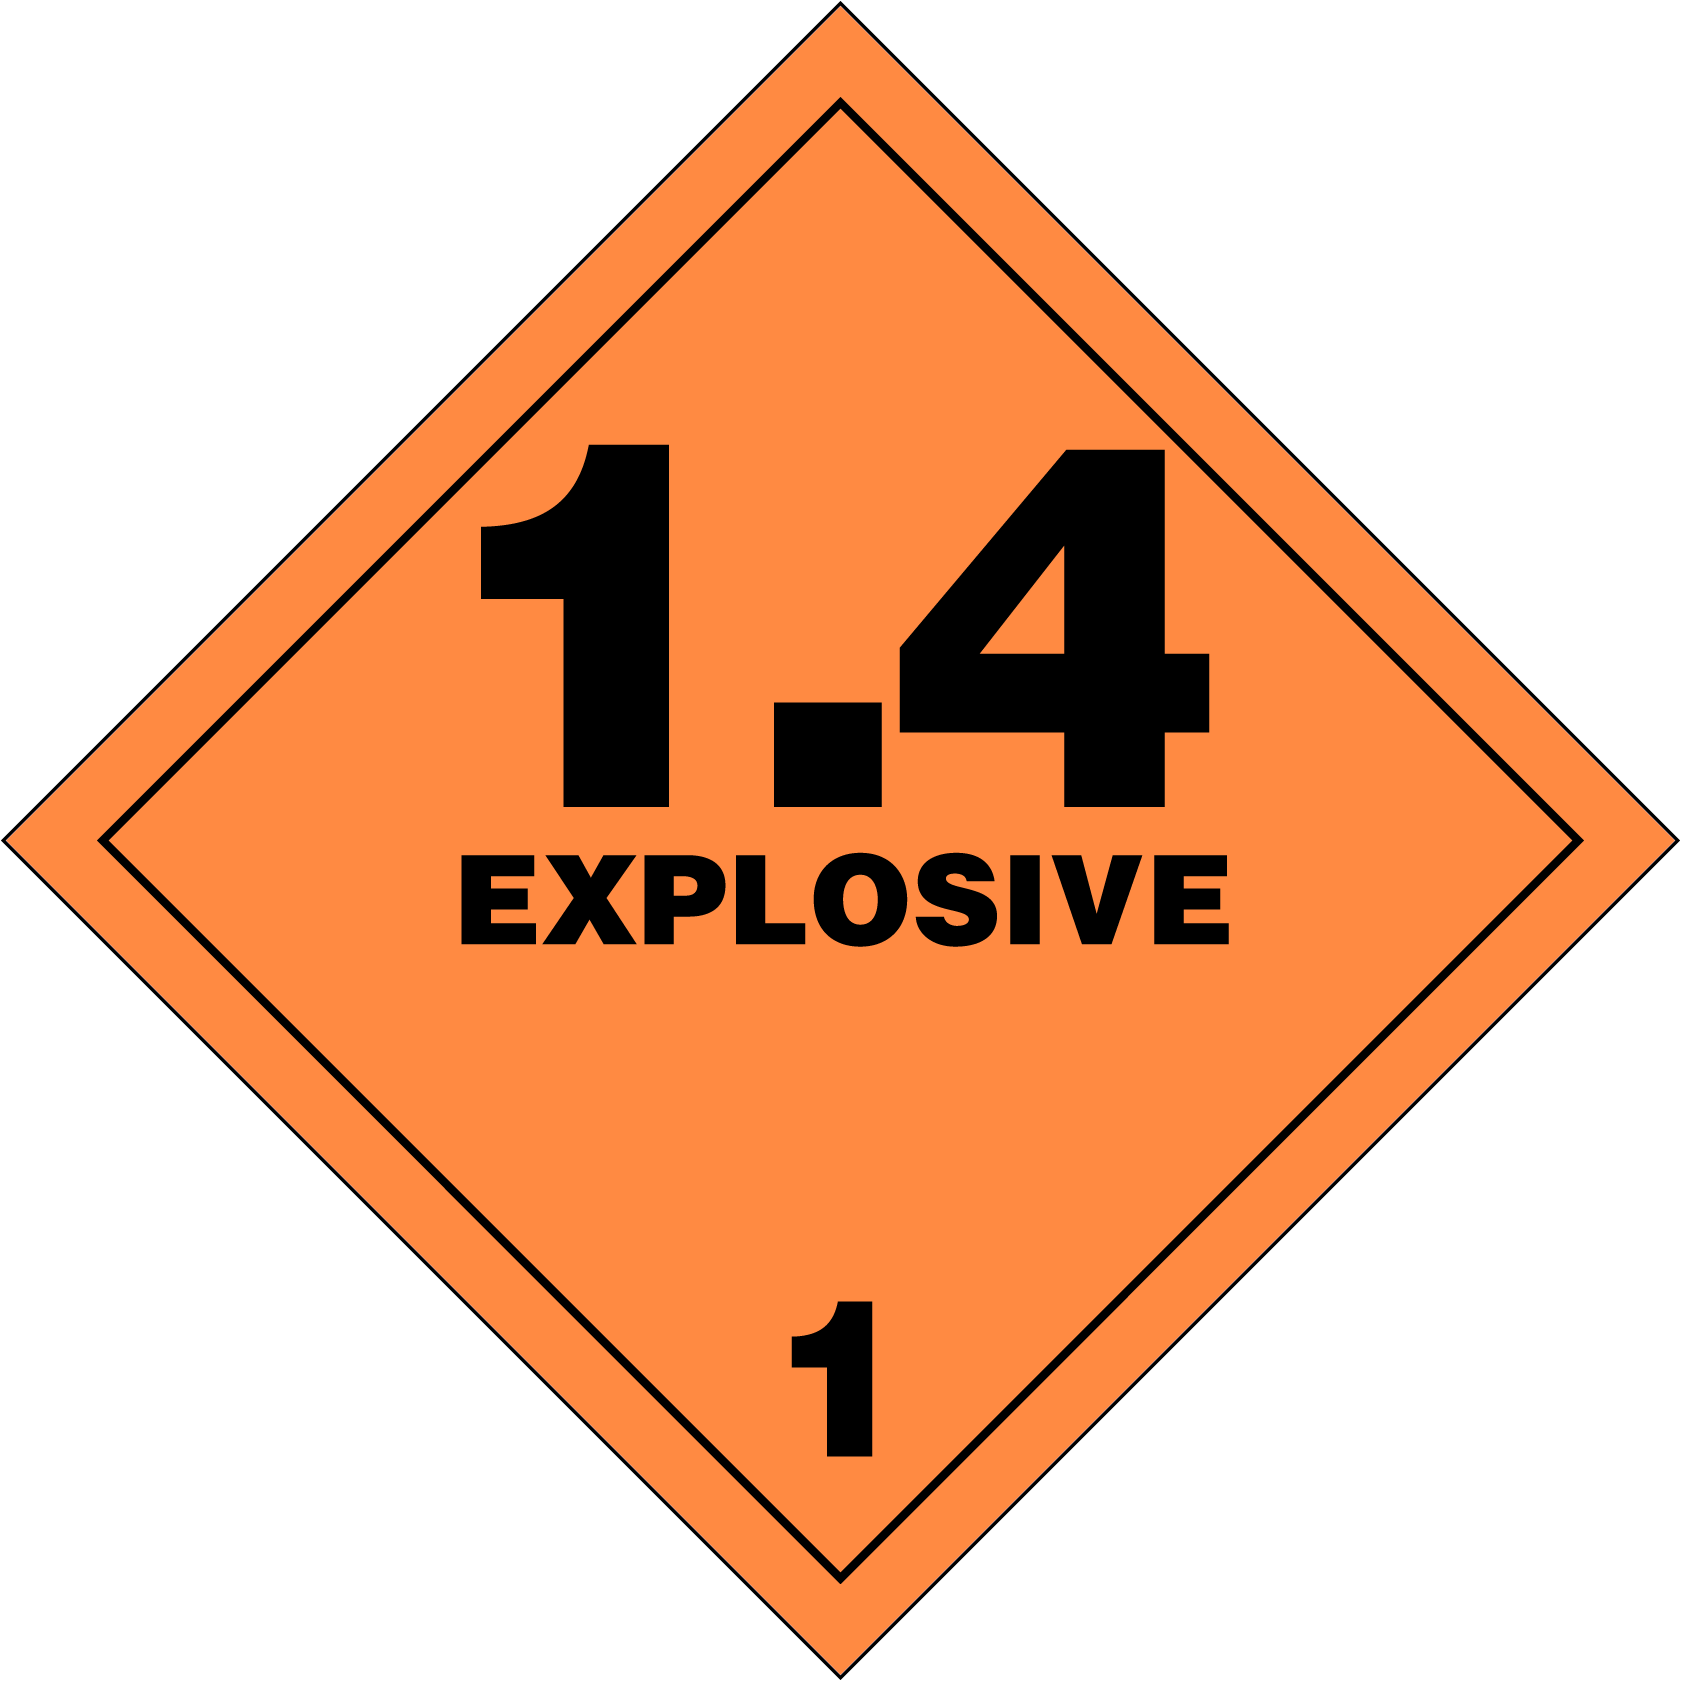 Explosive Sign Vector PNG Image File